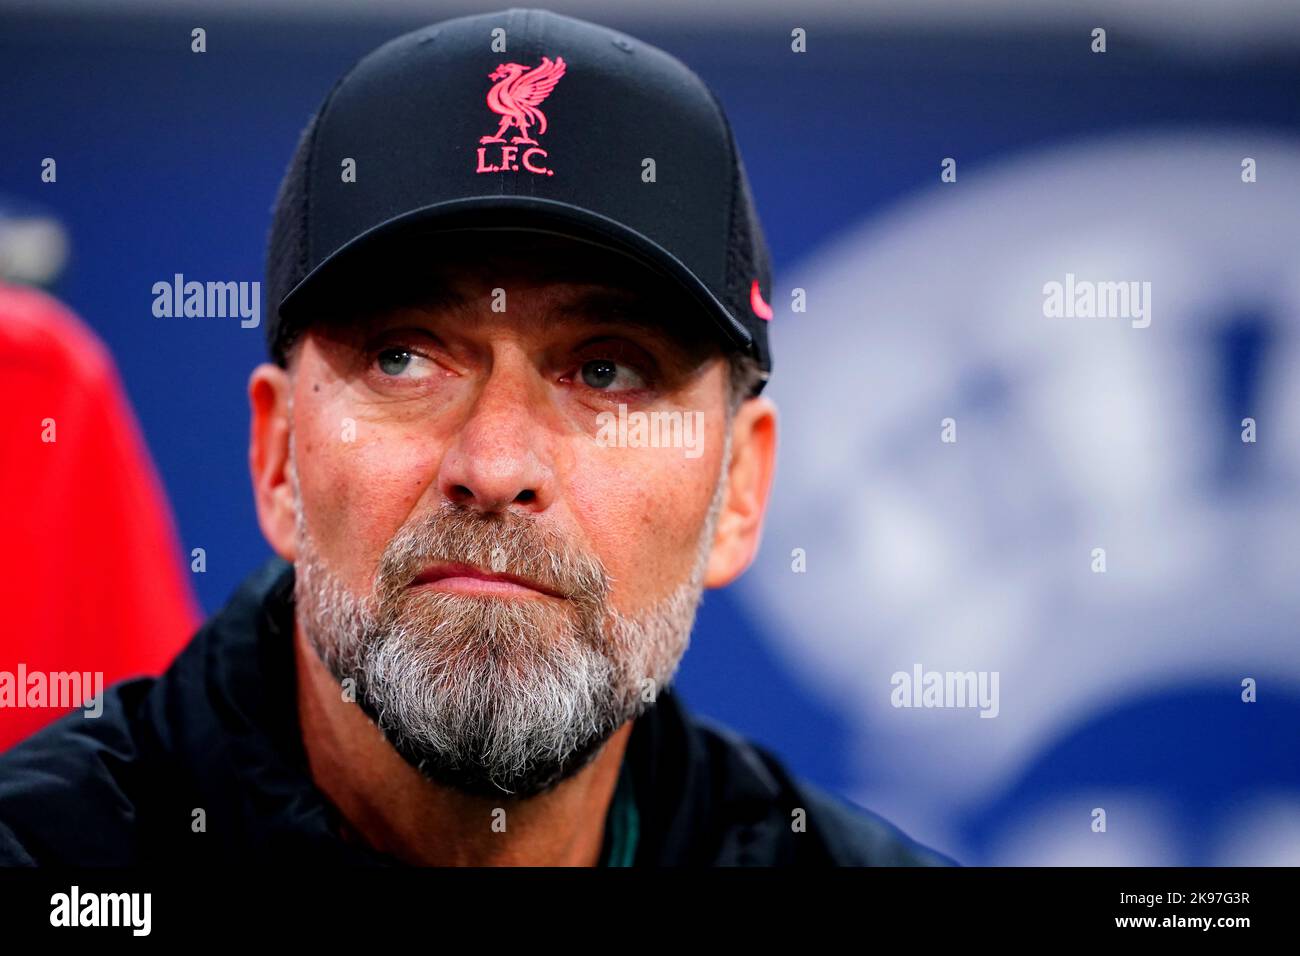 Liverpool manager Jurgen Klopp ahead of the UEFA Champions League group A match at the Johan Cruyff Arena in Amsterdam, Netherlands. Picture date: Wednesday October 26, 2022. Stock Photo